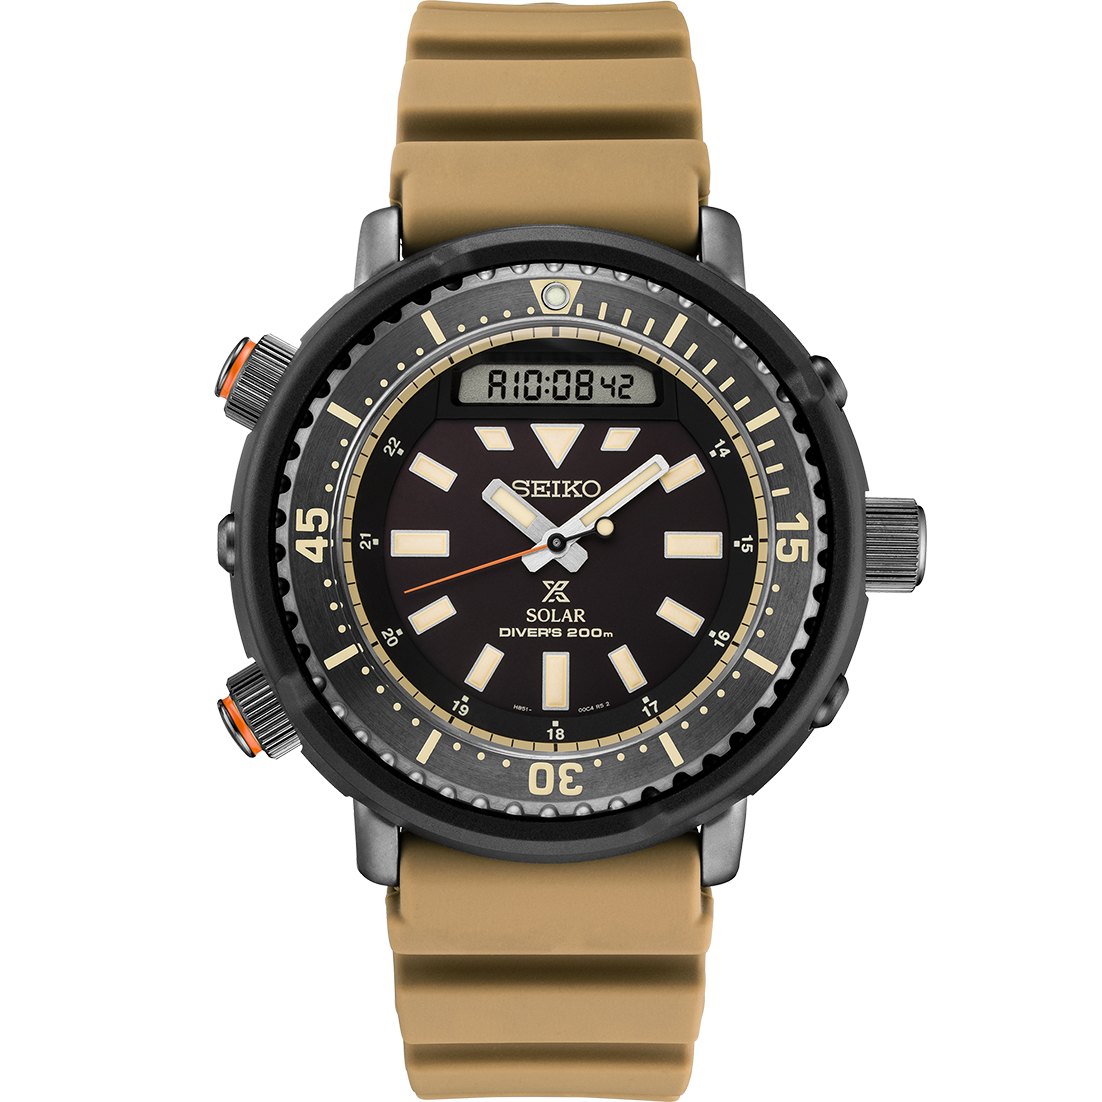 Seiko Prospex 47.8mm Stainless Steel Solar Diver's 200m Watch  
With Black Dial, Lumibrite on hands, indexs and bezel, Case is Stainless 
Steel(hard coating) And Plastic On Tan Silicone Strap
Other Features:
Hardlex Crystal
Bezel: Unidirectional Rota